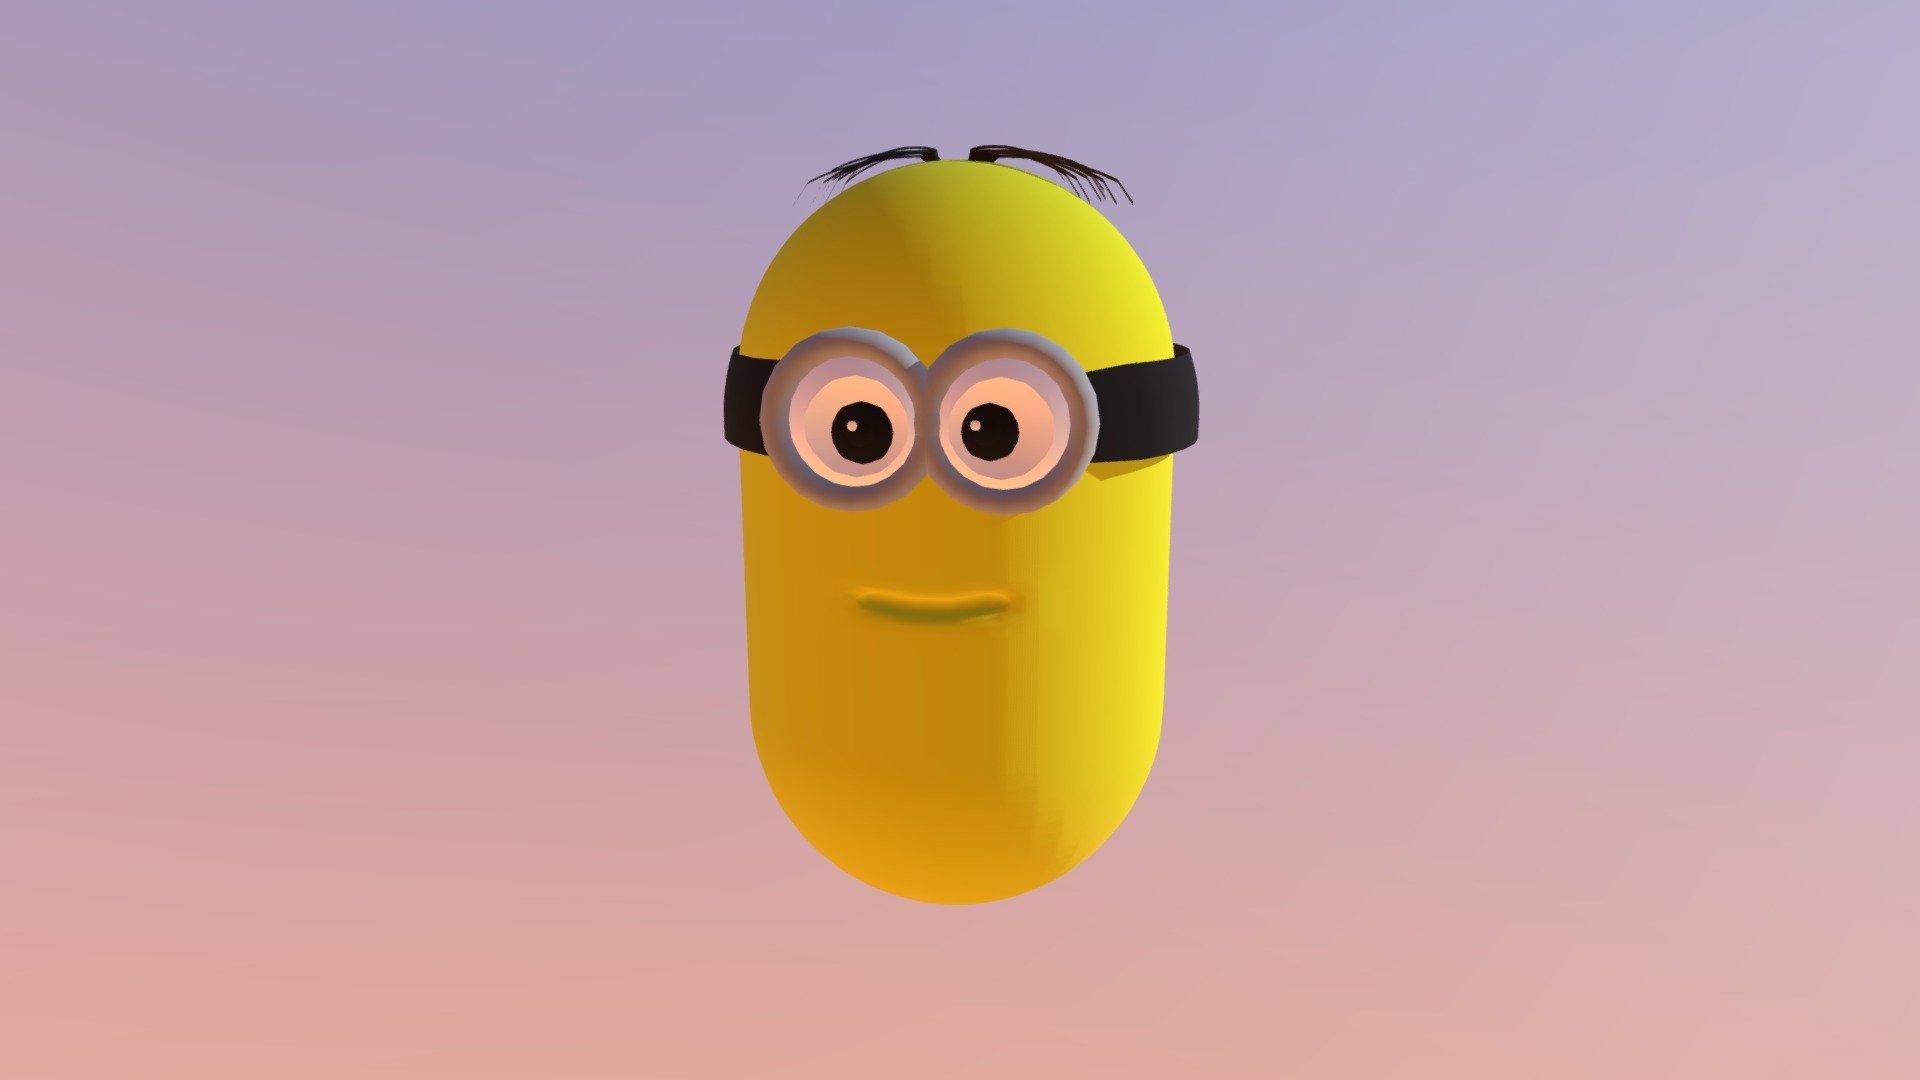 Dispicable Me Minion